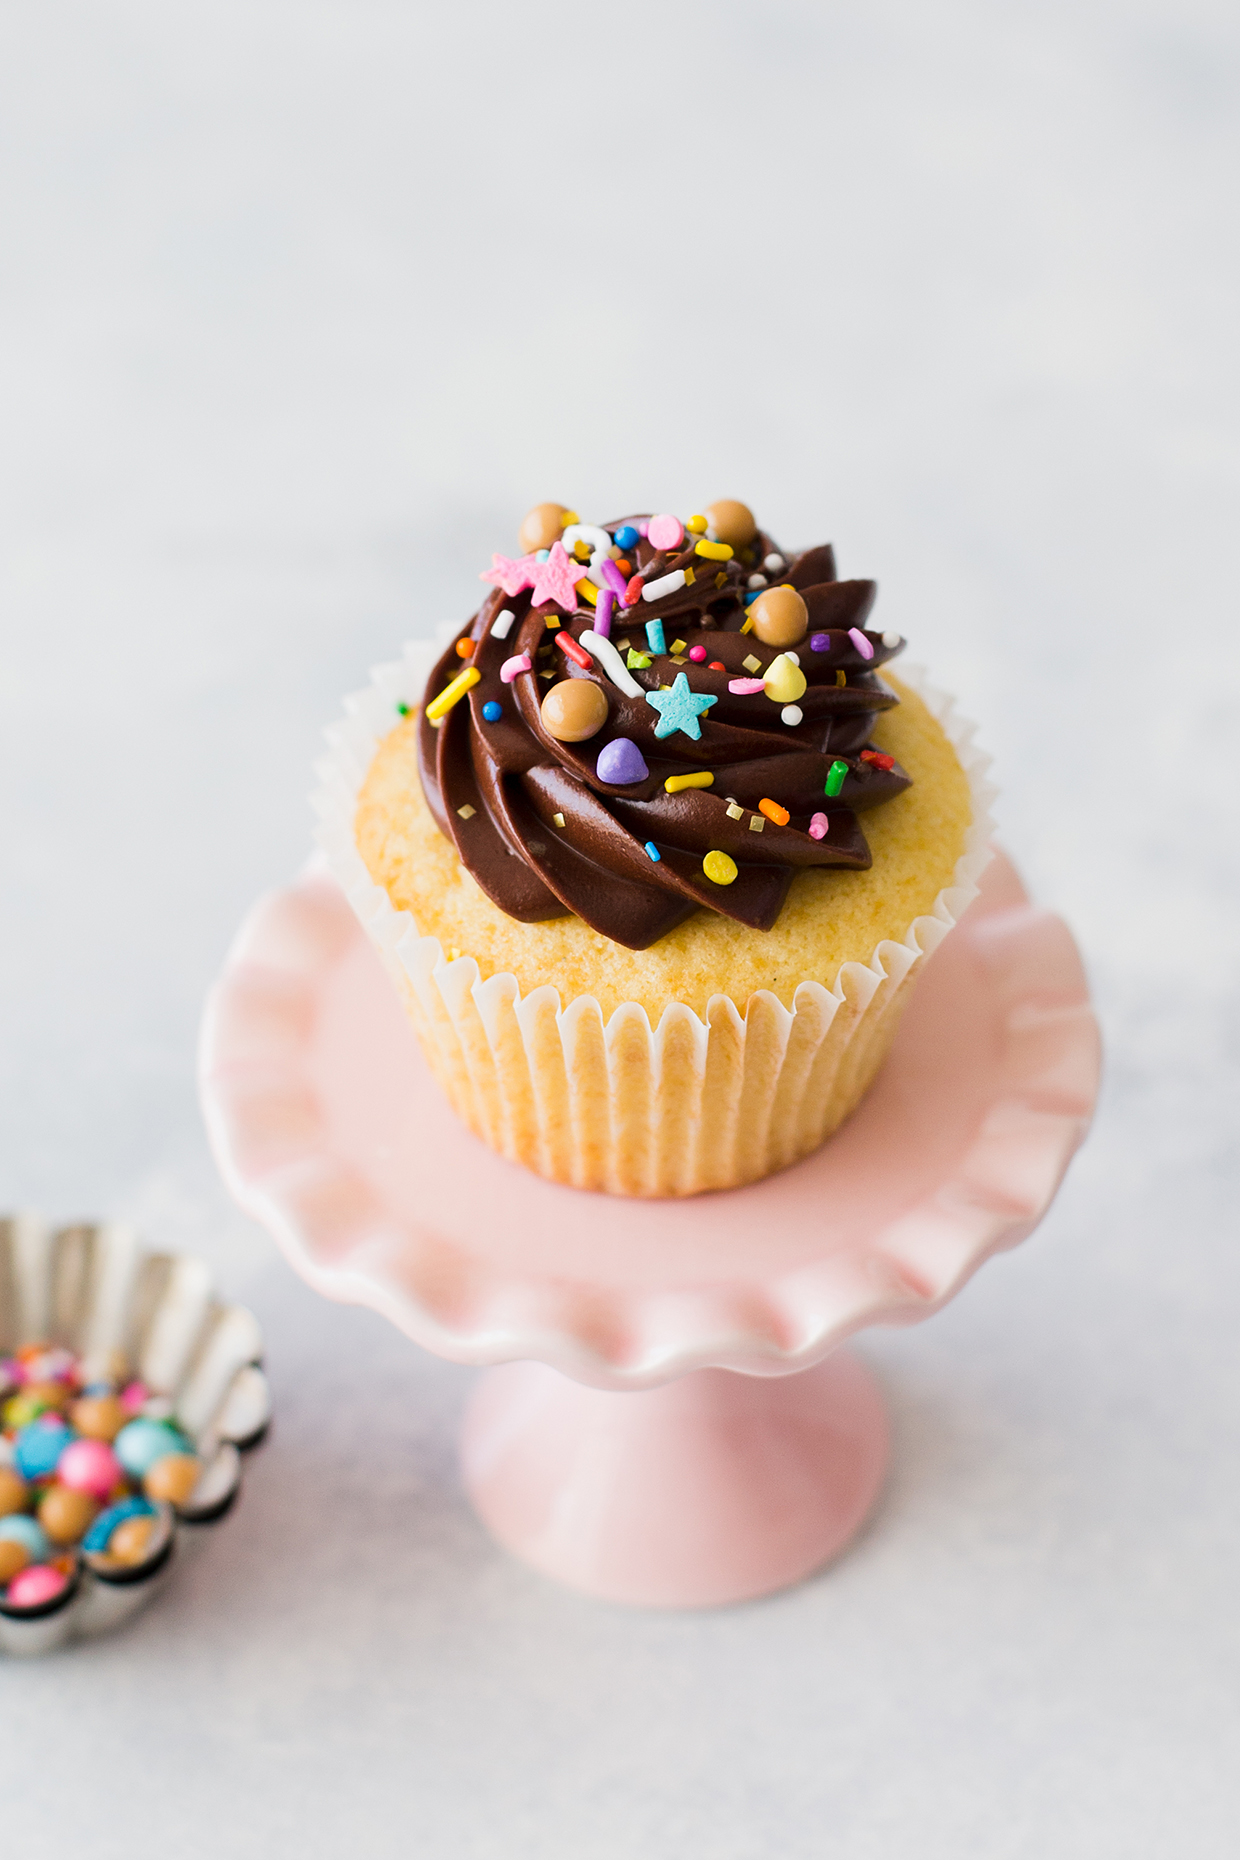 Yellow Cupcakes with Chocolate Creme Fraiche Frosting